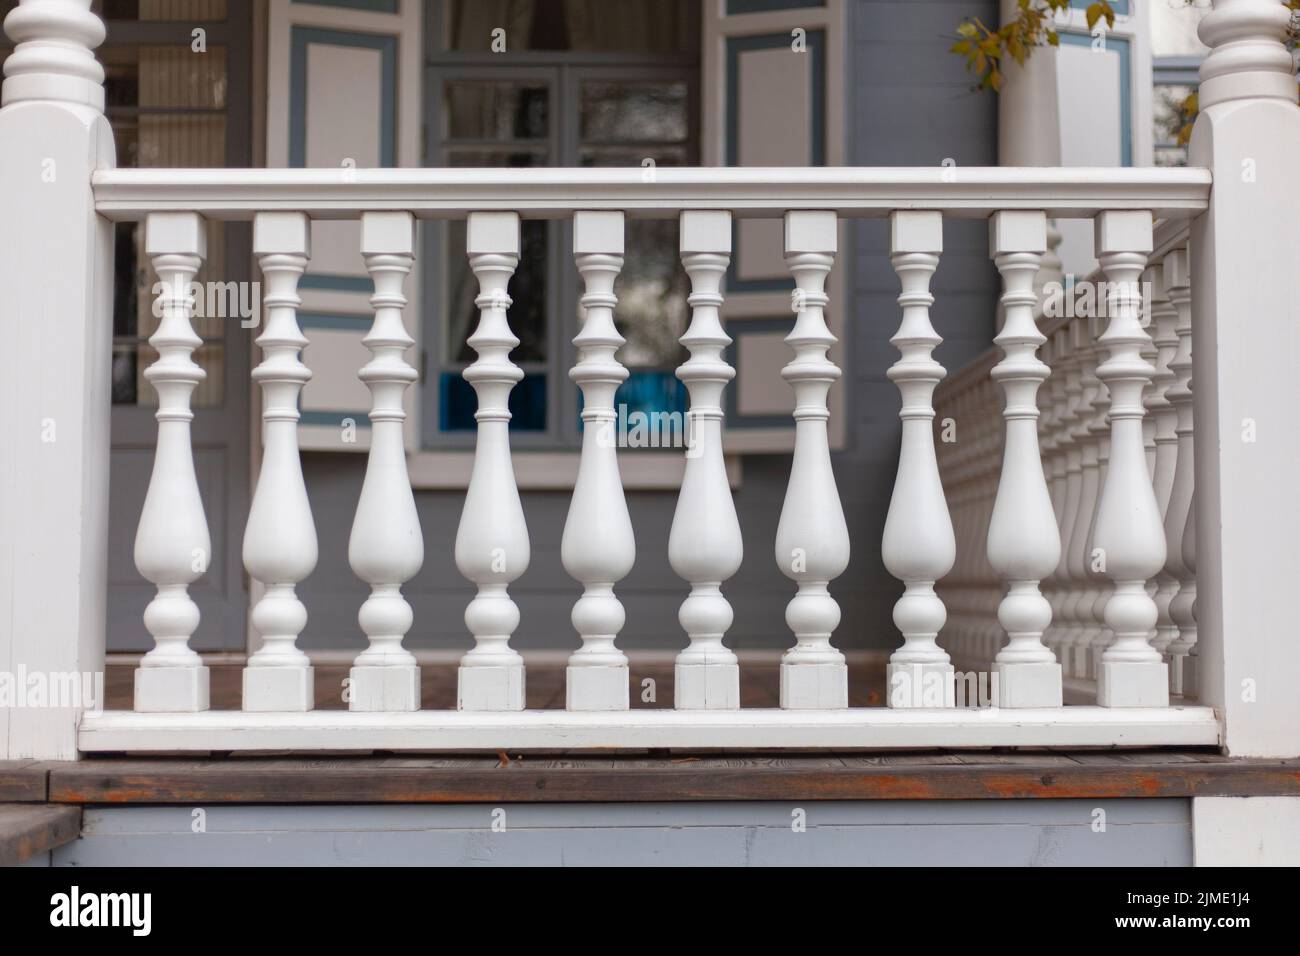 Architectural element on the porch of the baluster. Stock Photo